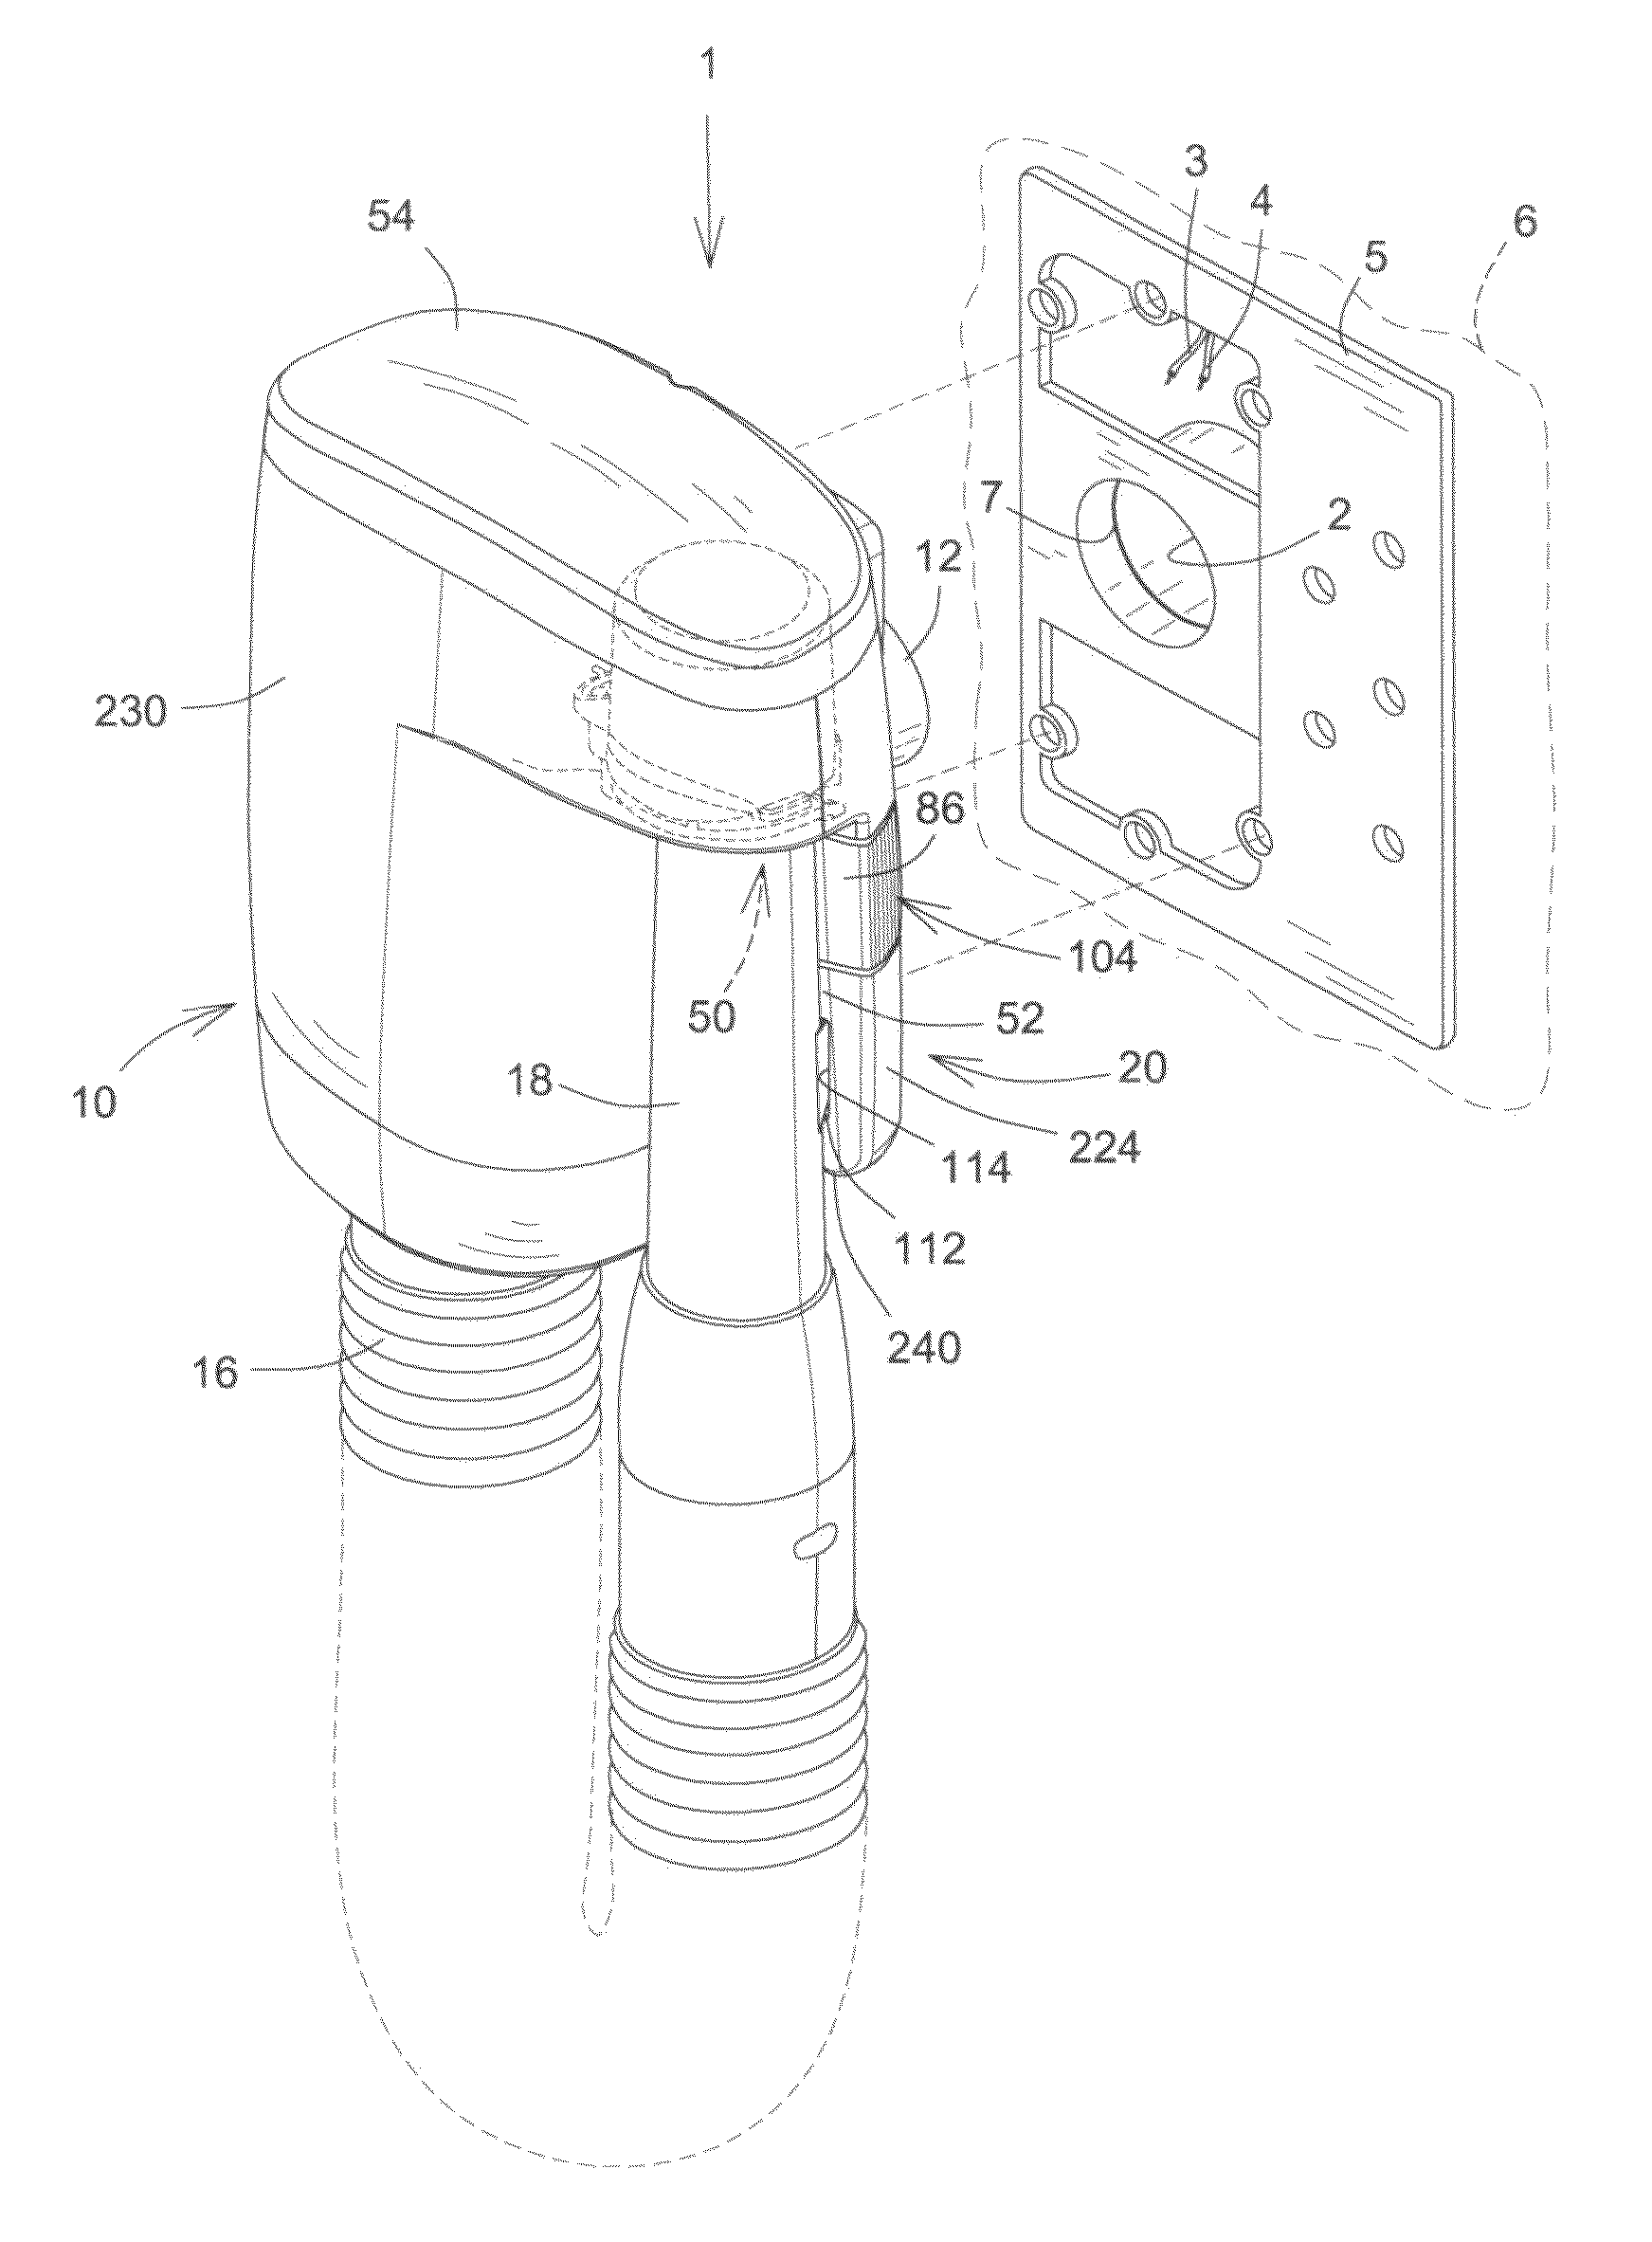 Auxiliary vacuum device for a central vacuum cleaning system